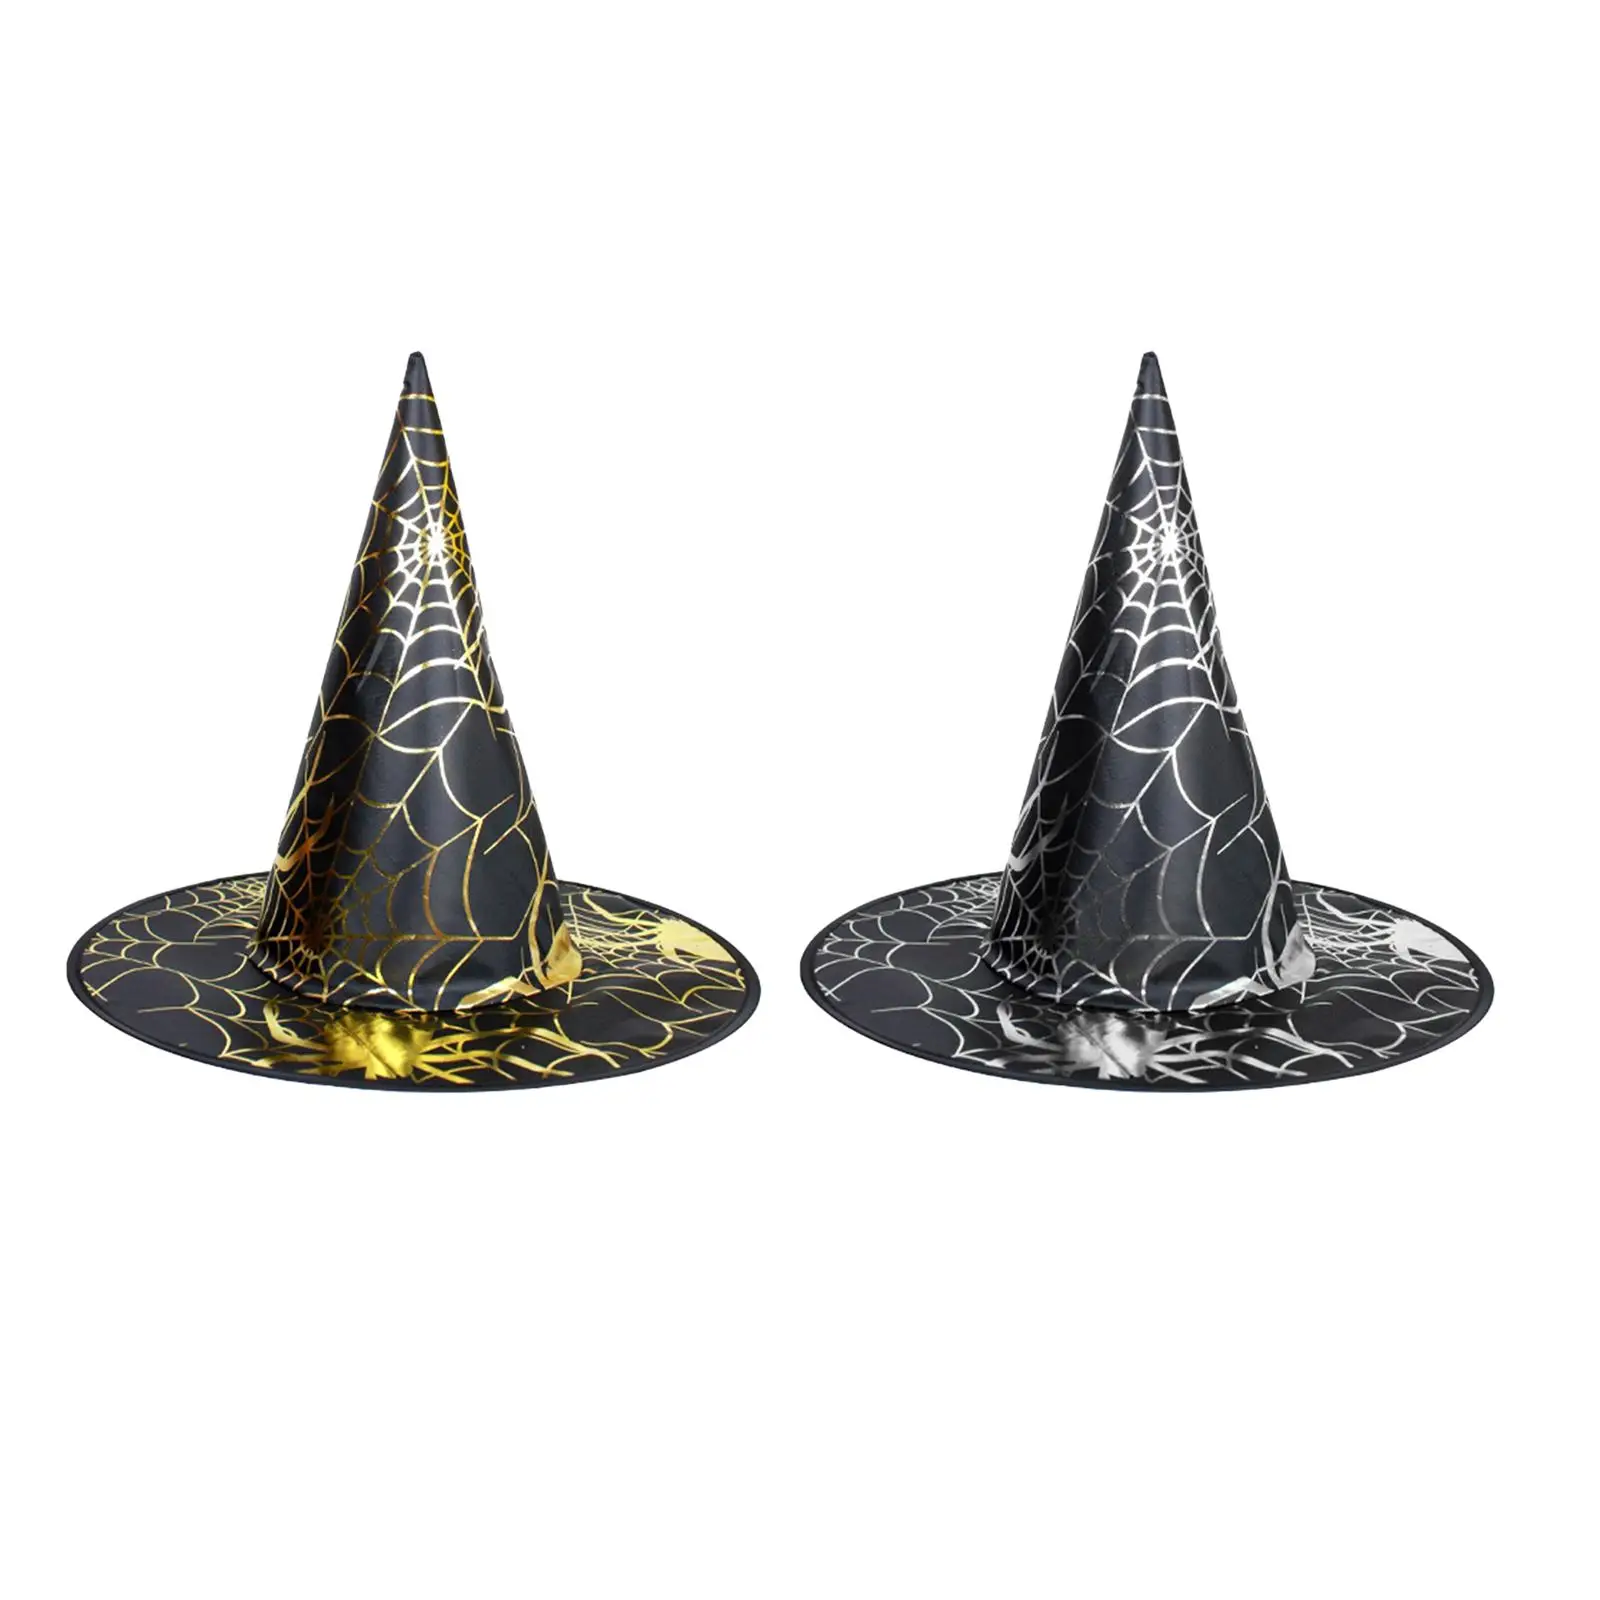 Witch Hat Fancy Dress Masquerade Creative Costume Accessory Show Pointed Hat for Kids Adult Men Women Unisex Role Play Festivals